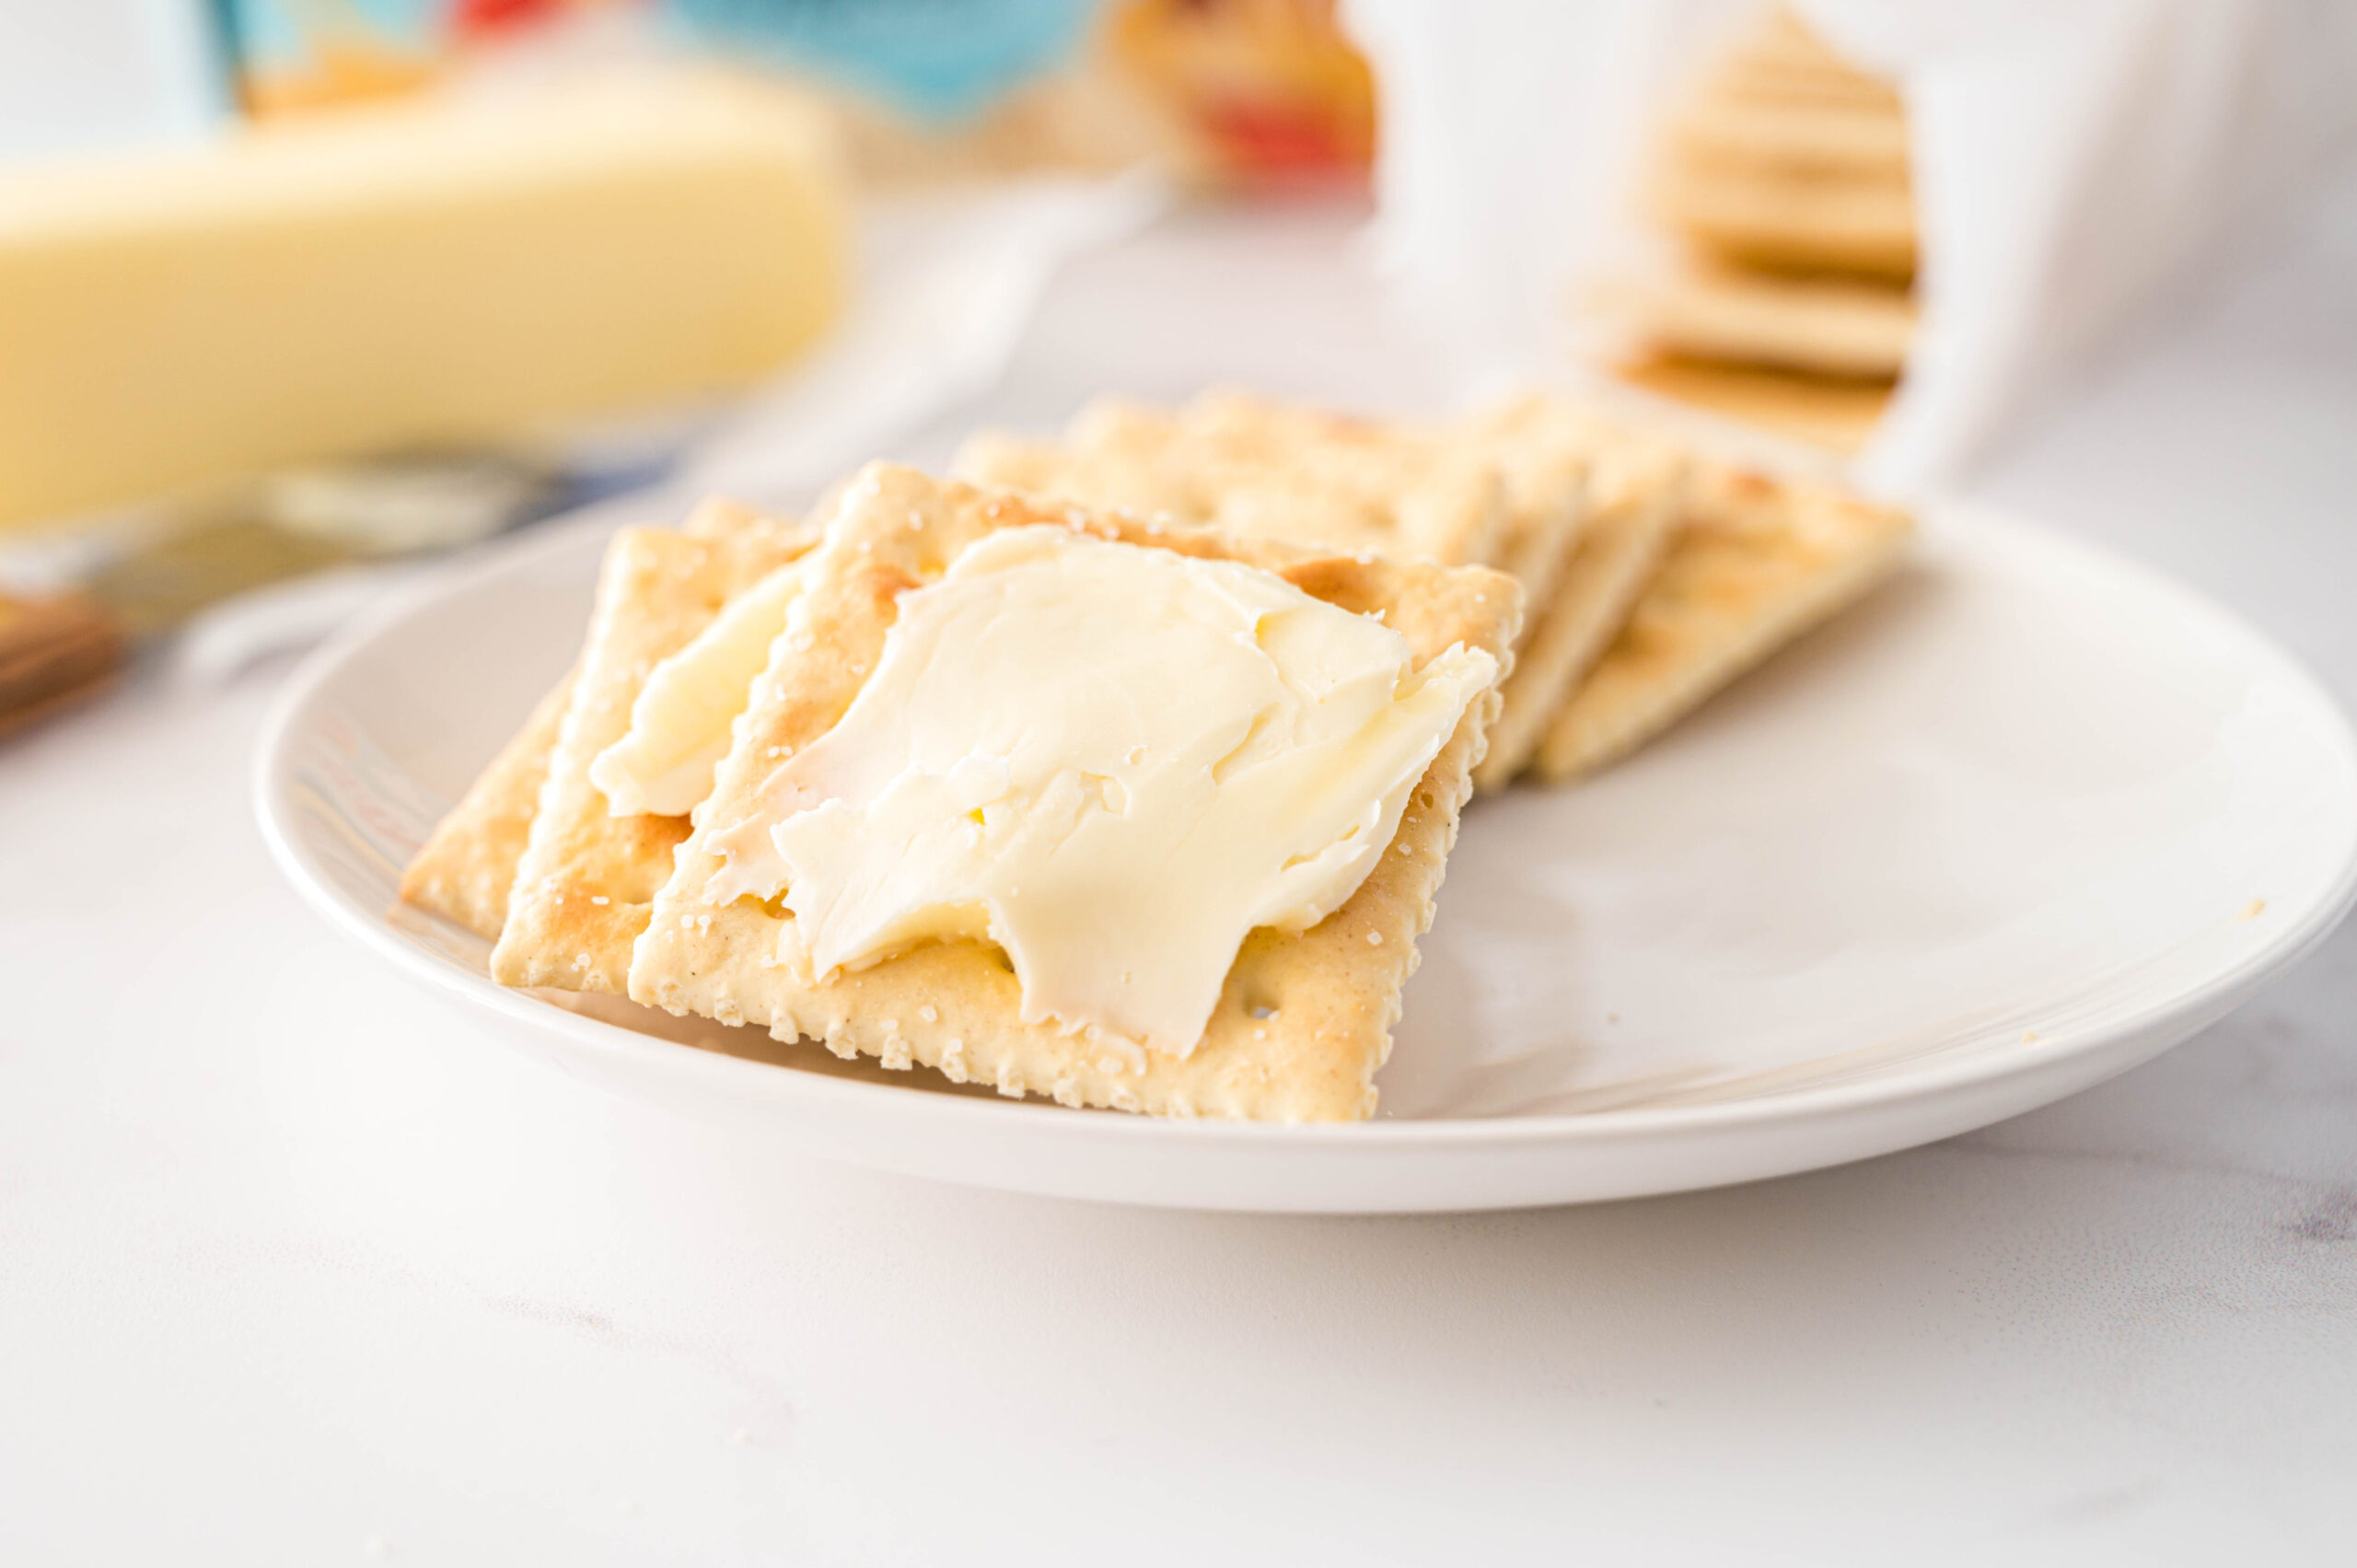 ‘Buttered Saltine Crackers’ Are The Hot New Snack Trend Everyone Is Talking About